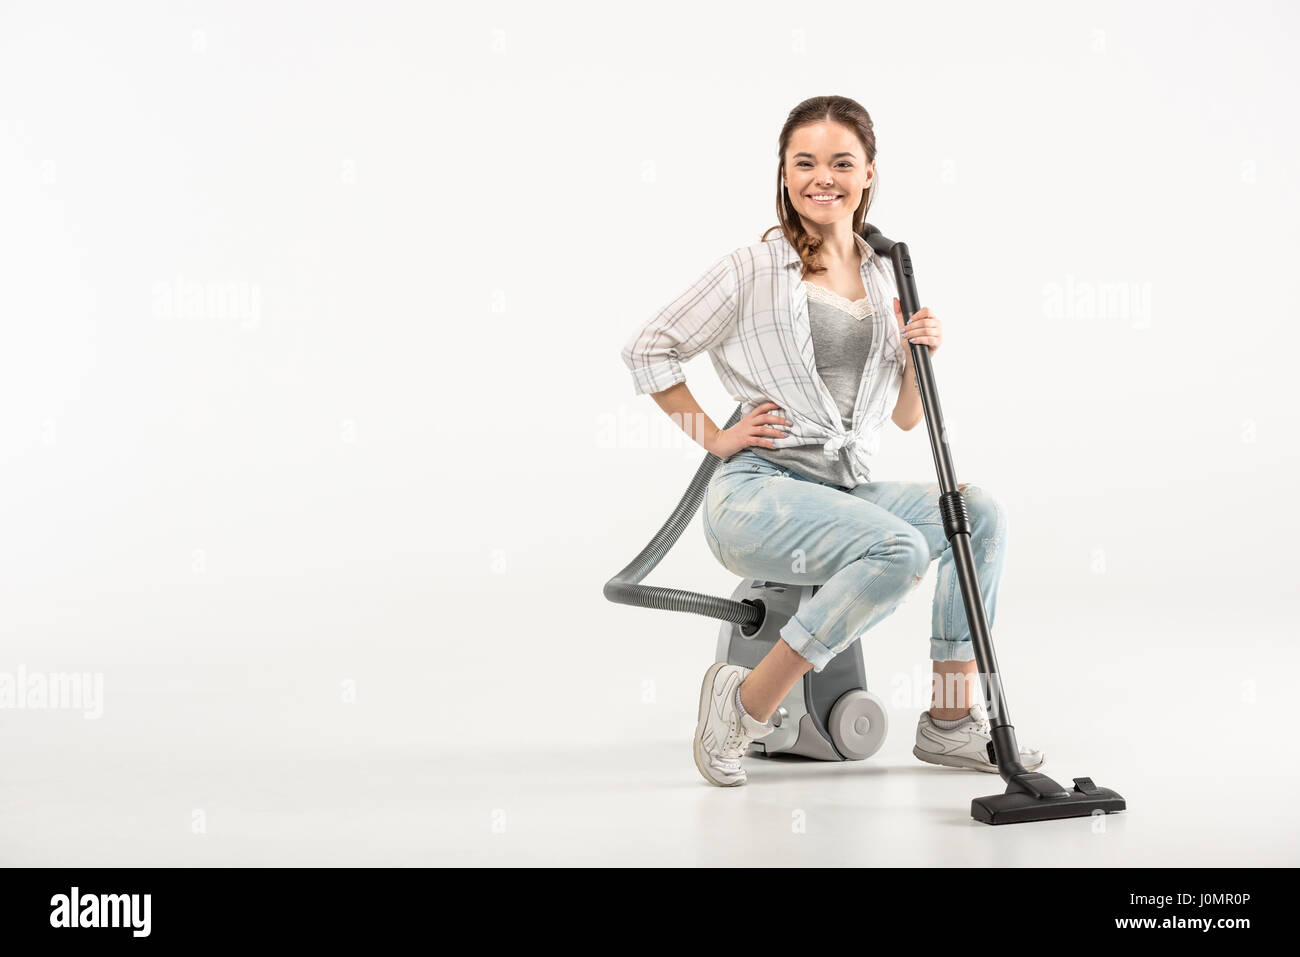 Attractive young woman sitting on vacuum cleaner and smiling at camera Stock Photo